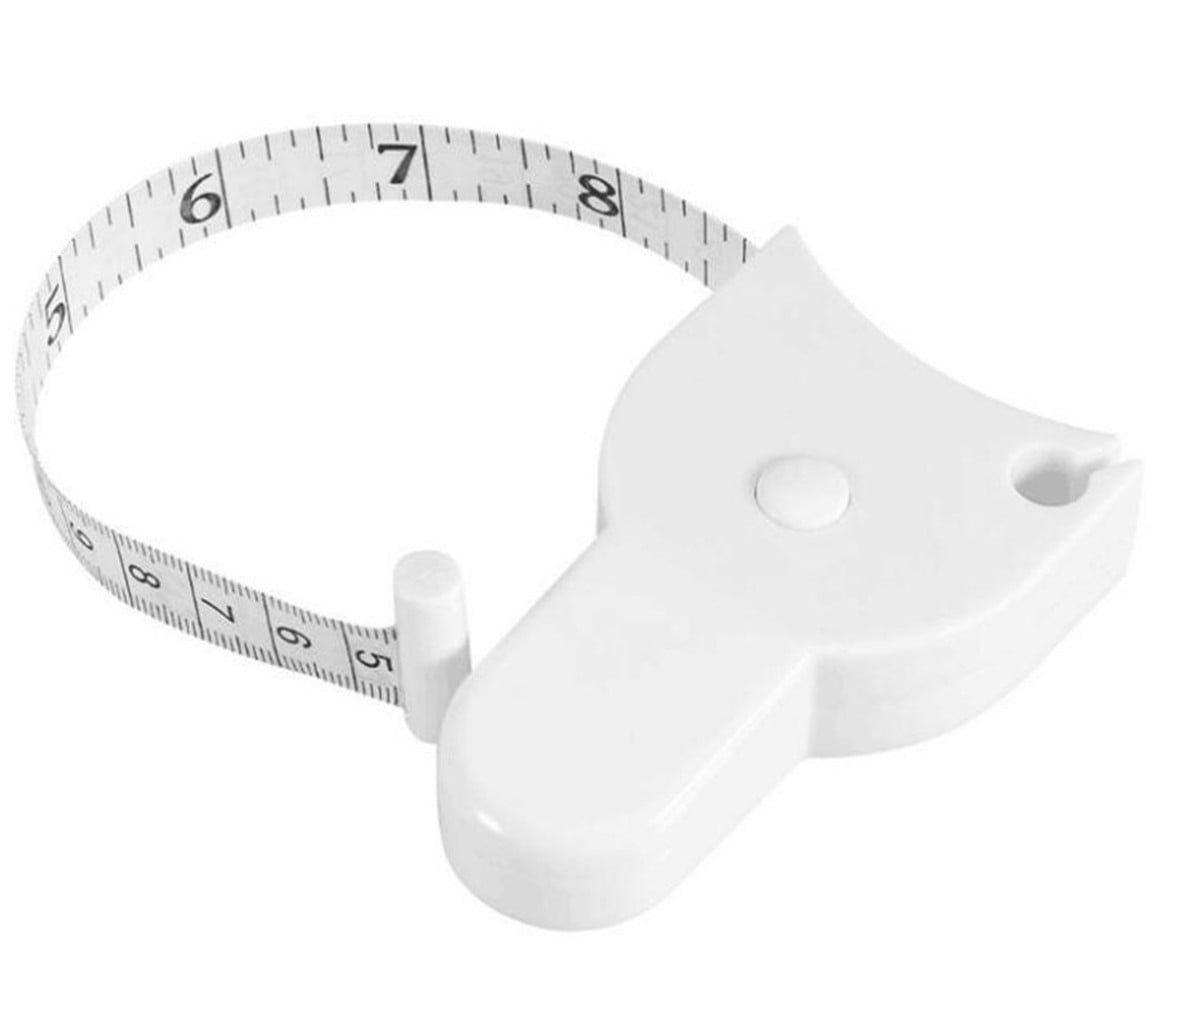 White Bust Arms and More 80 Inch Retractable Measuring Tape for Body: Waist Hip Perfect Body Tape Measure 